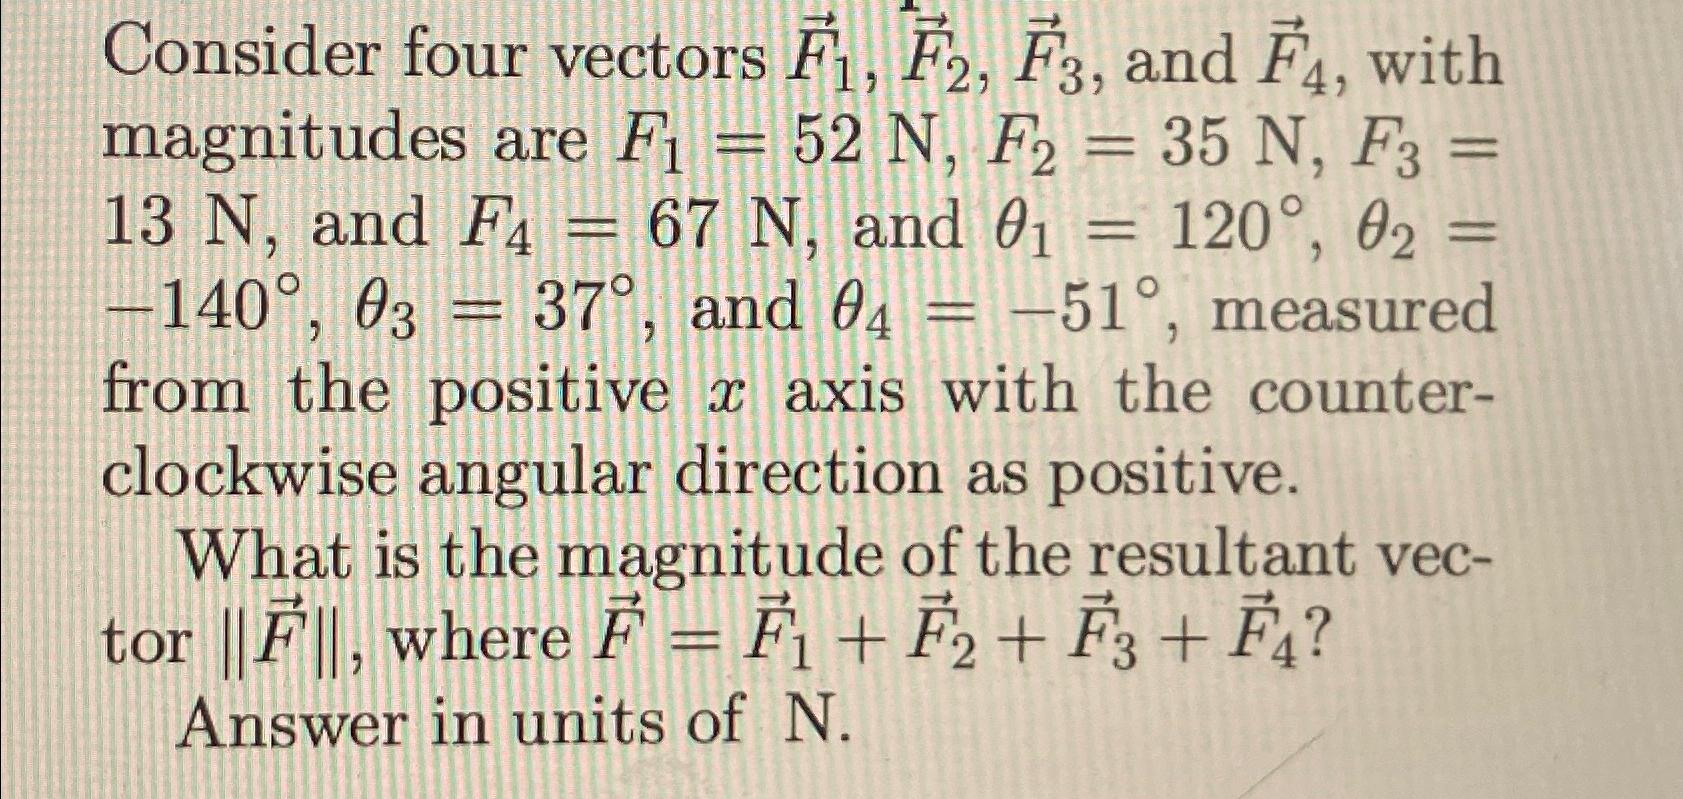 Consider four vectors F1, F2, F3, and F4, with magnitudes are F = 52 N, F = 35 N, F3 67 N, and 0 = 120, 0 37,